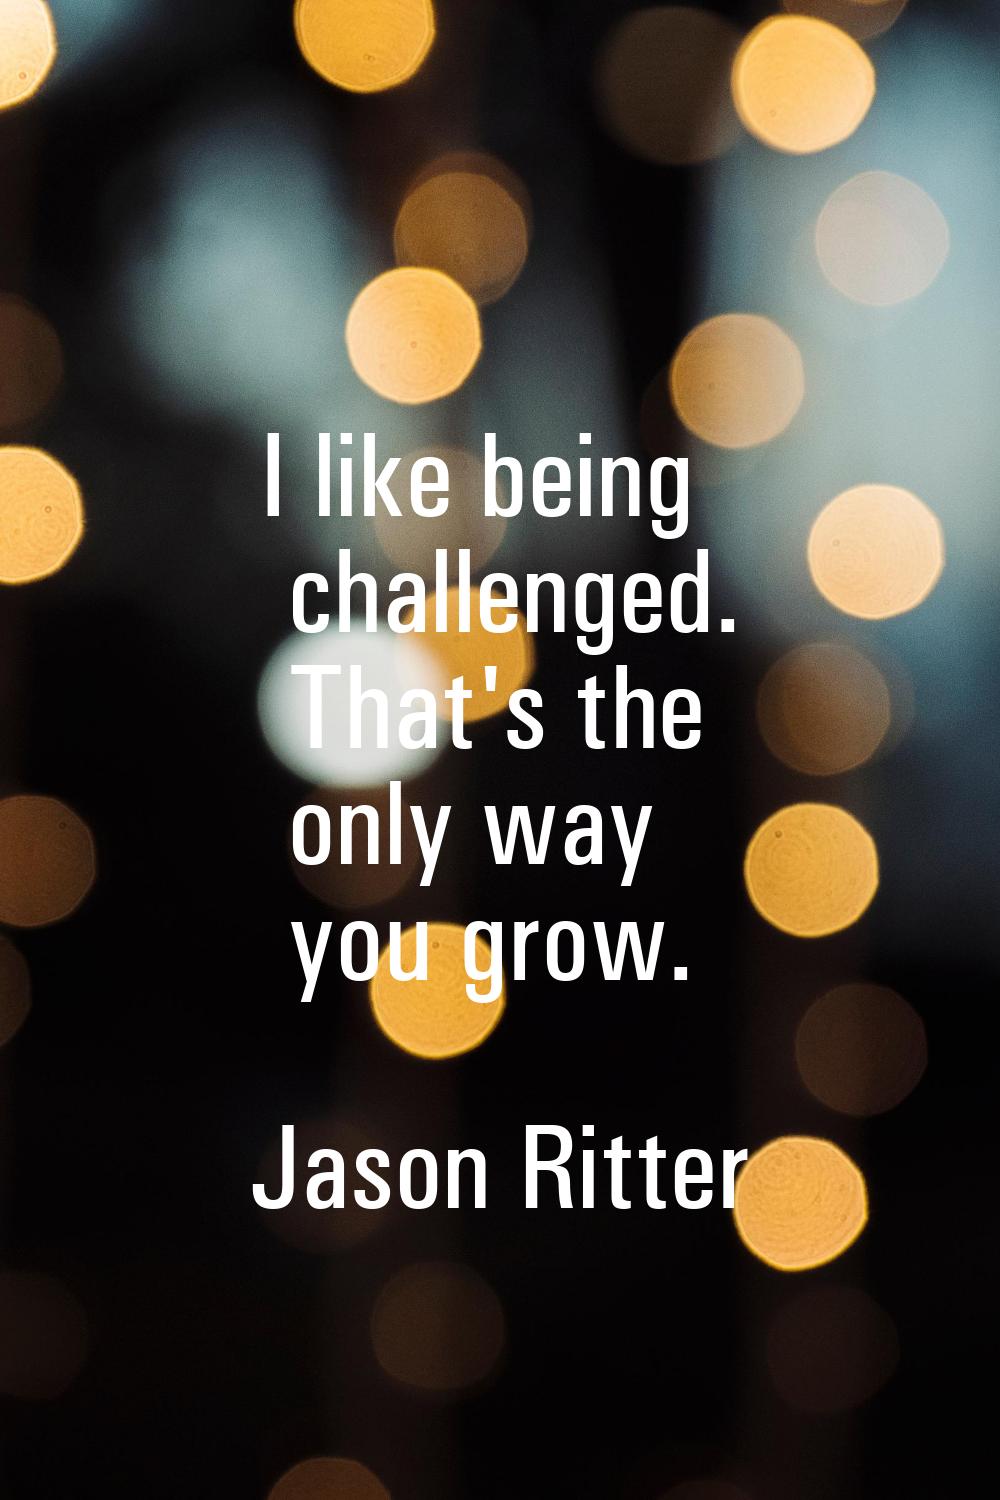 I like being challenged. That's the only way you grow.